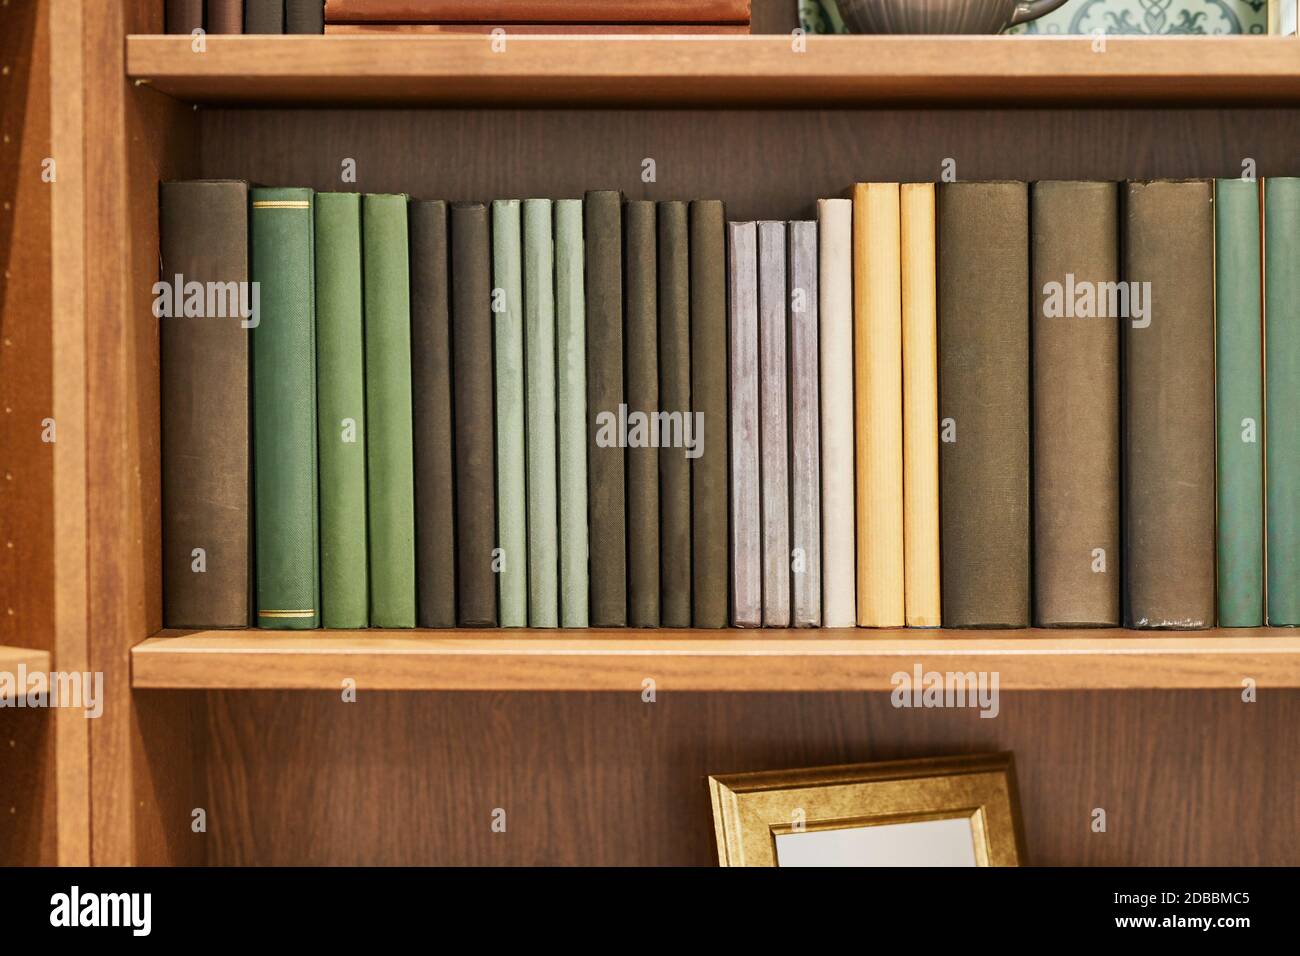 Bookshelf with series of books in rows Stock Photo